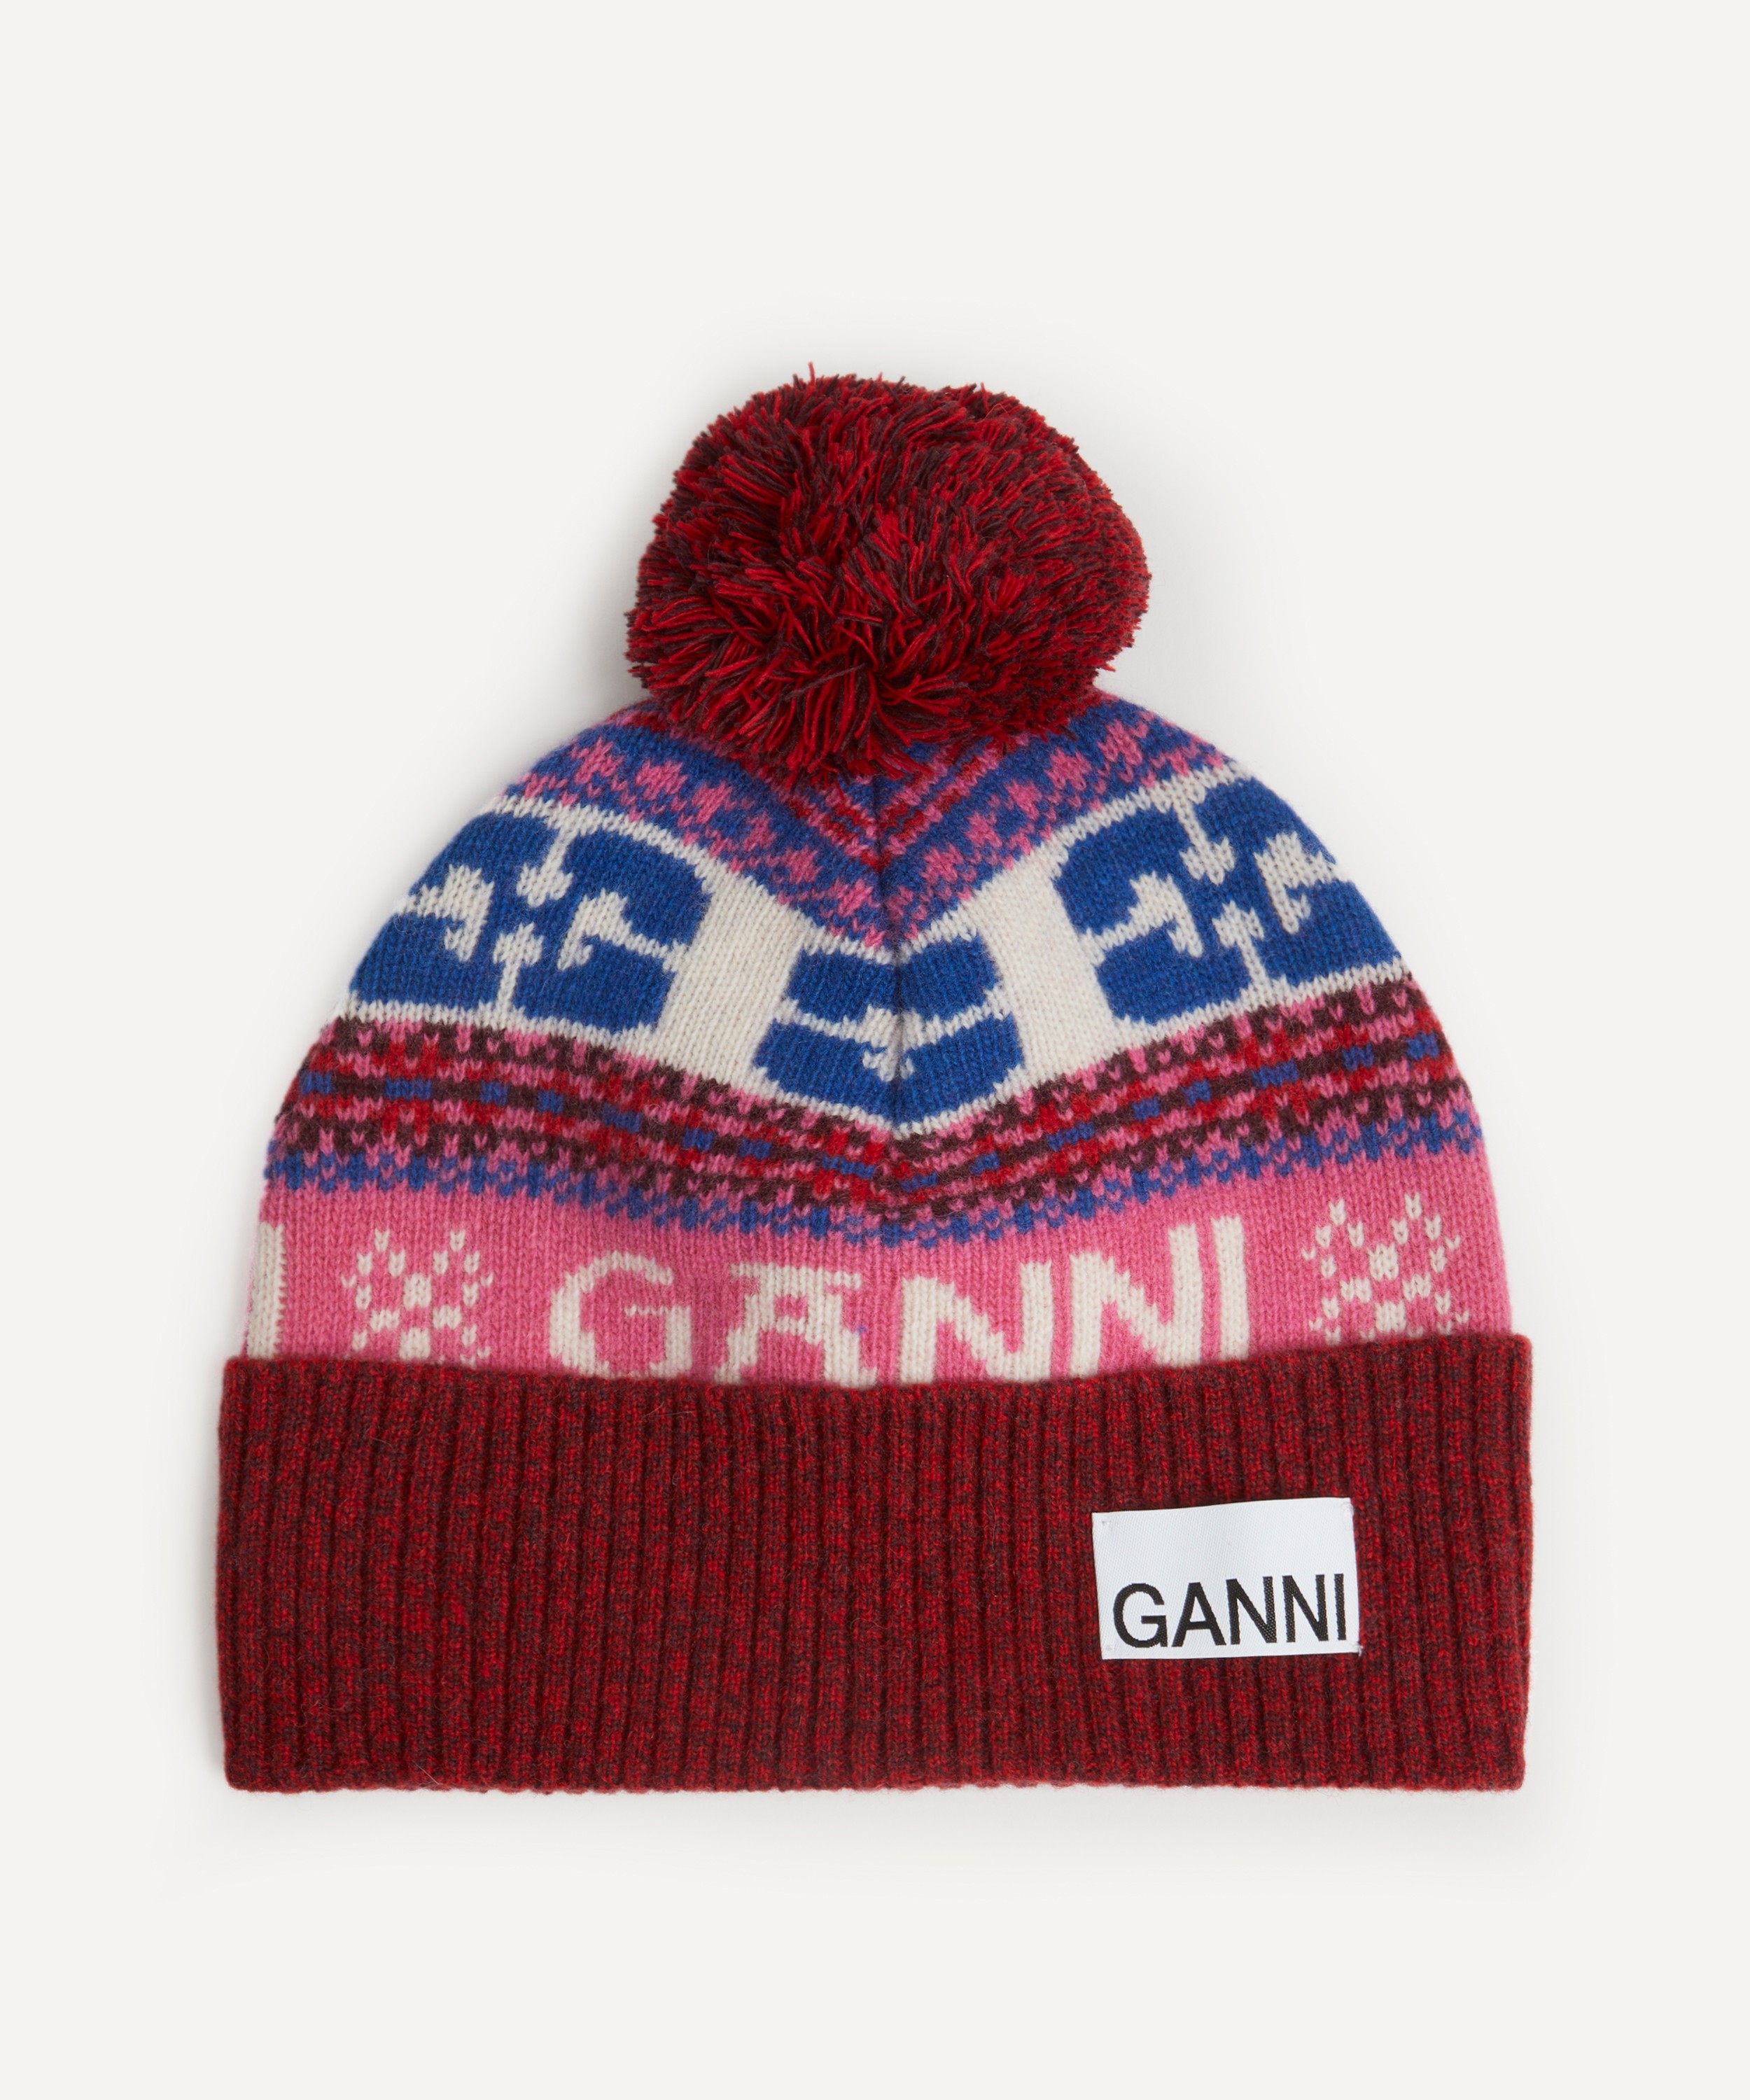 Ganni - Graphic Wool Beanie image number null